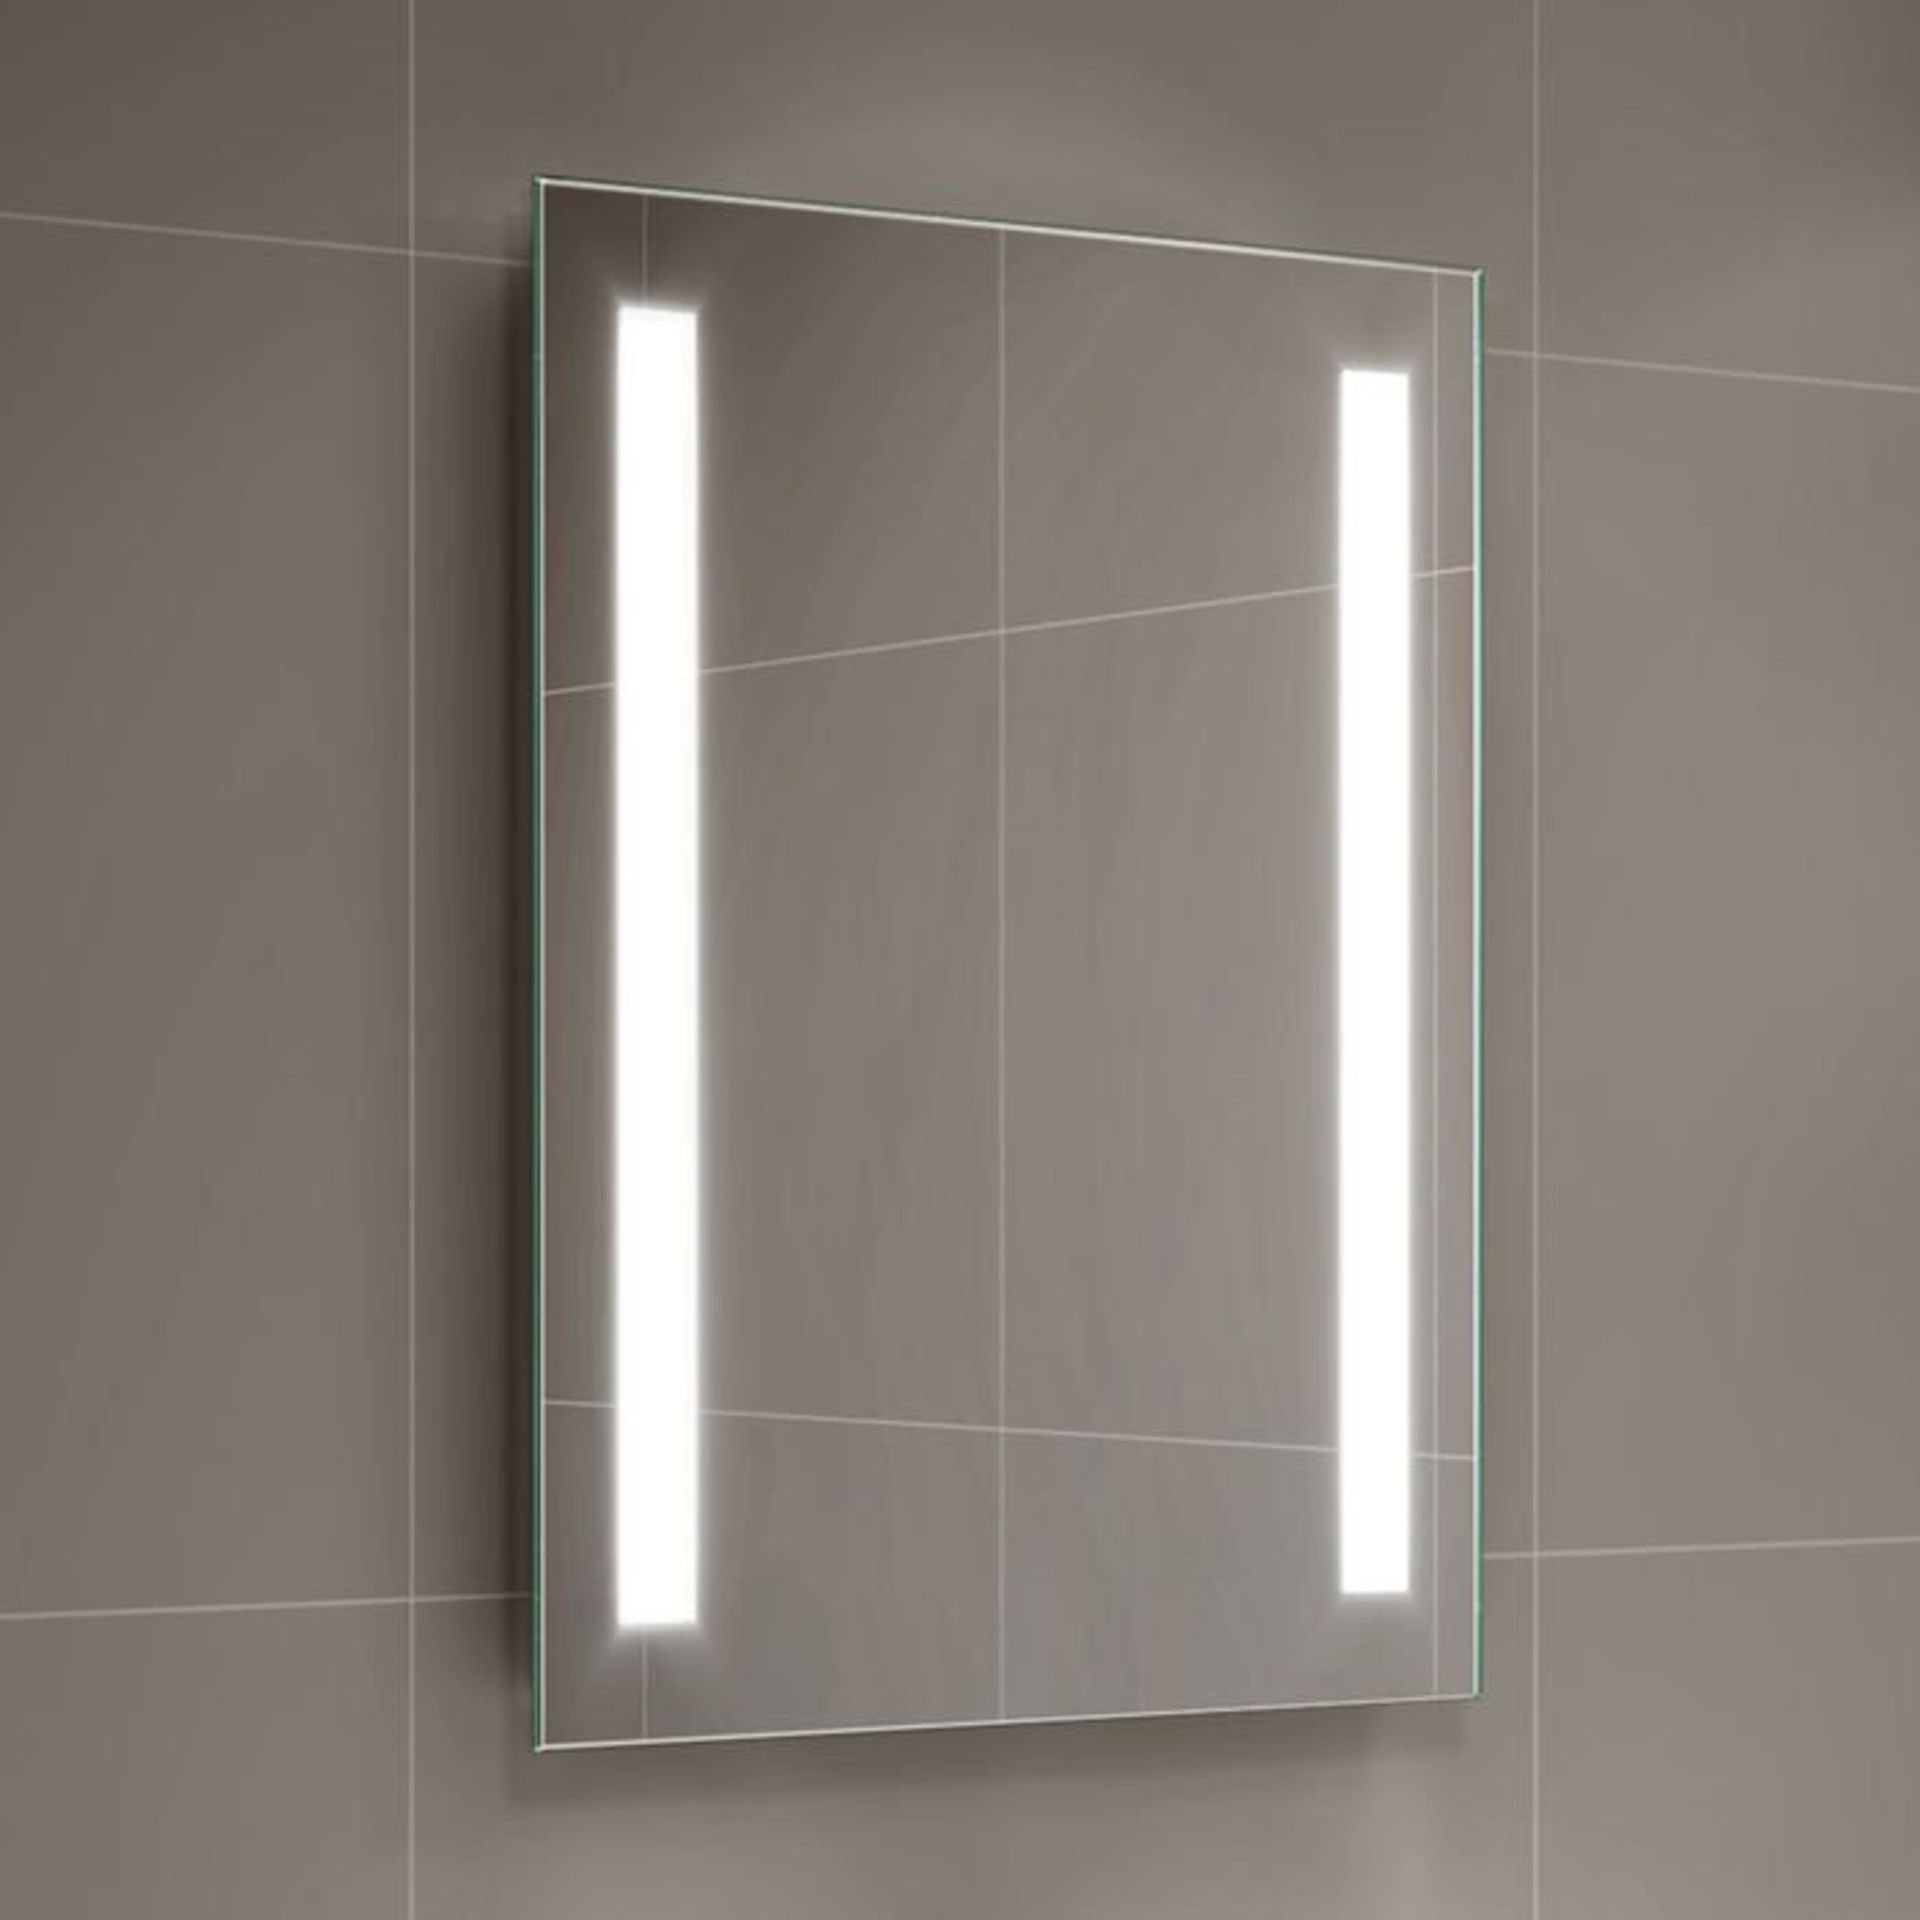 (V155) 500x700mm Omega LED Mirror - Battery Operated. Energy saving controlled On / Off switch